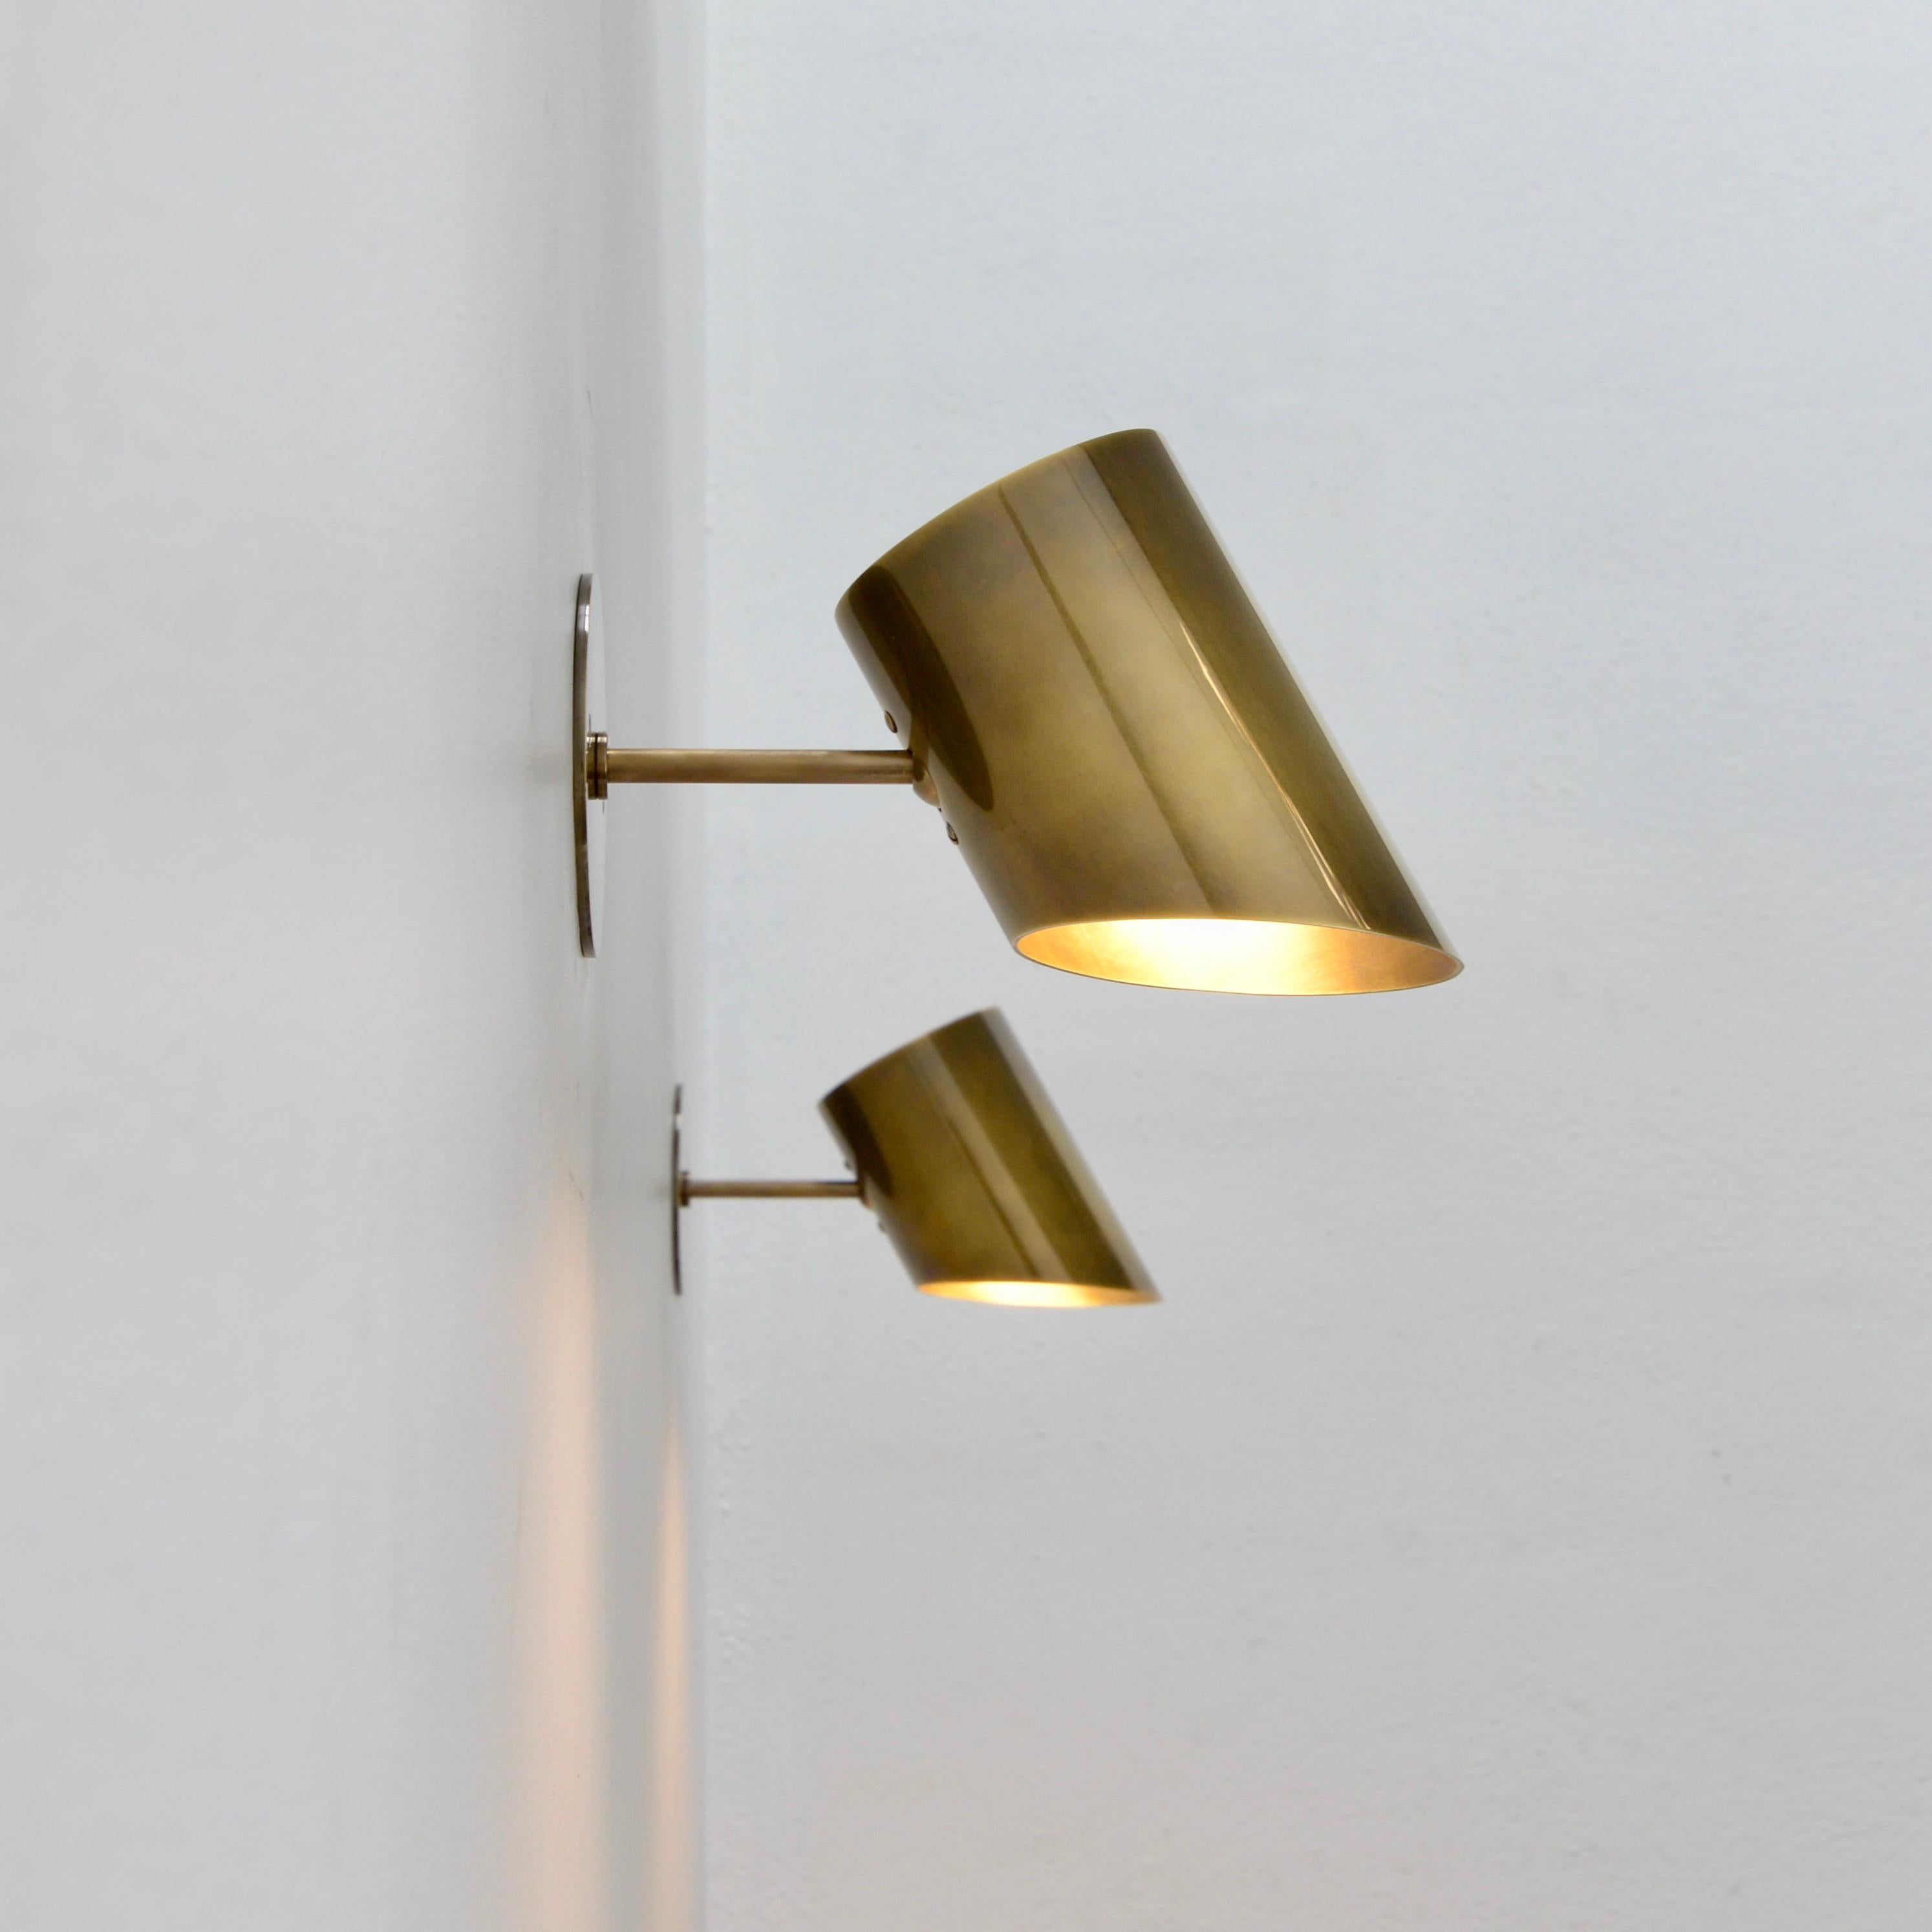 Part of Lumfardo Luminaries contemporary collection, the LUcona Sconce is a classic mid century modern design made to order. Crafted from all brass, this fixture fully articulates for directional illumination and can be wired for any worldwide